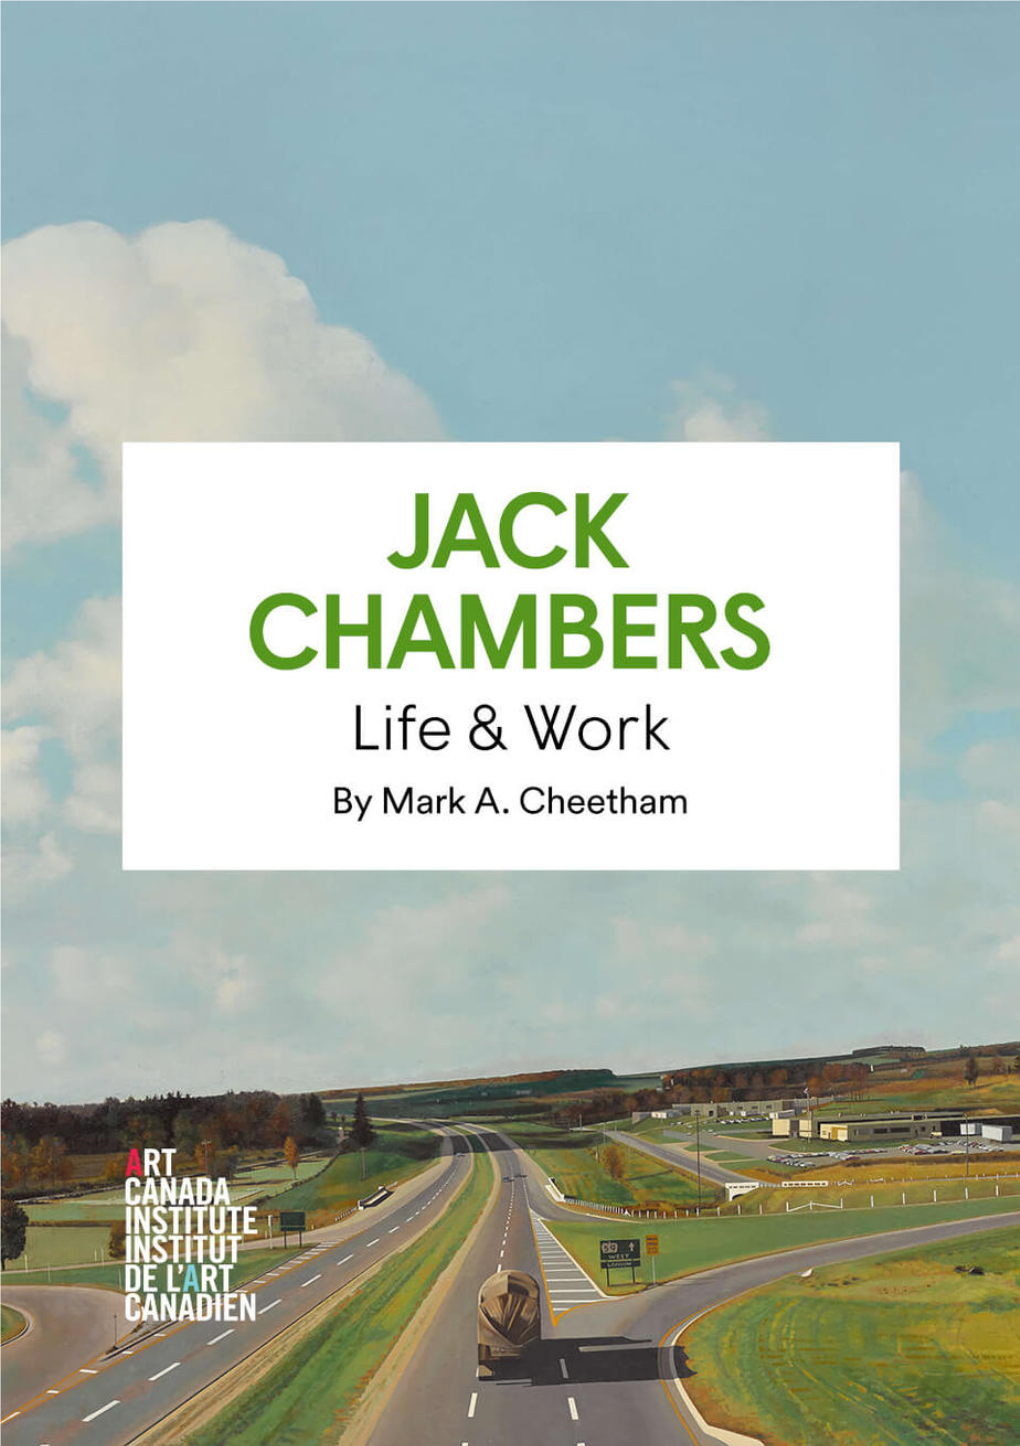 JACK CHAMBERS Life & Work by Mark A